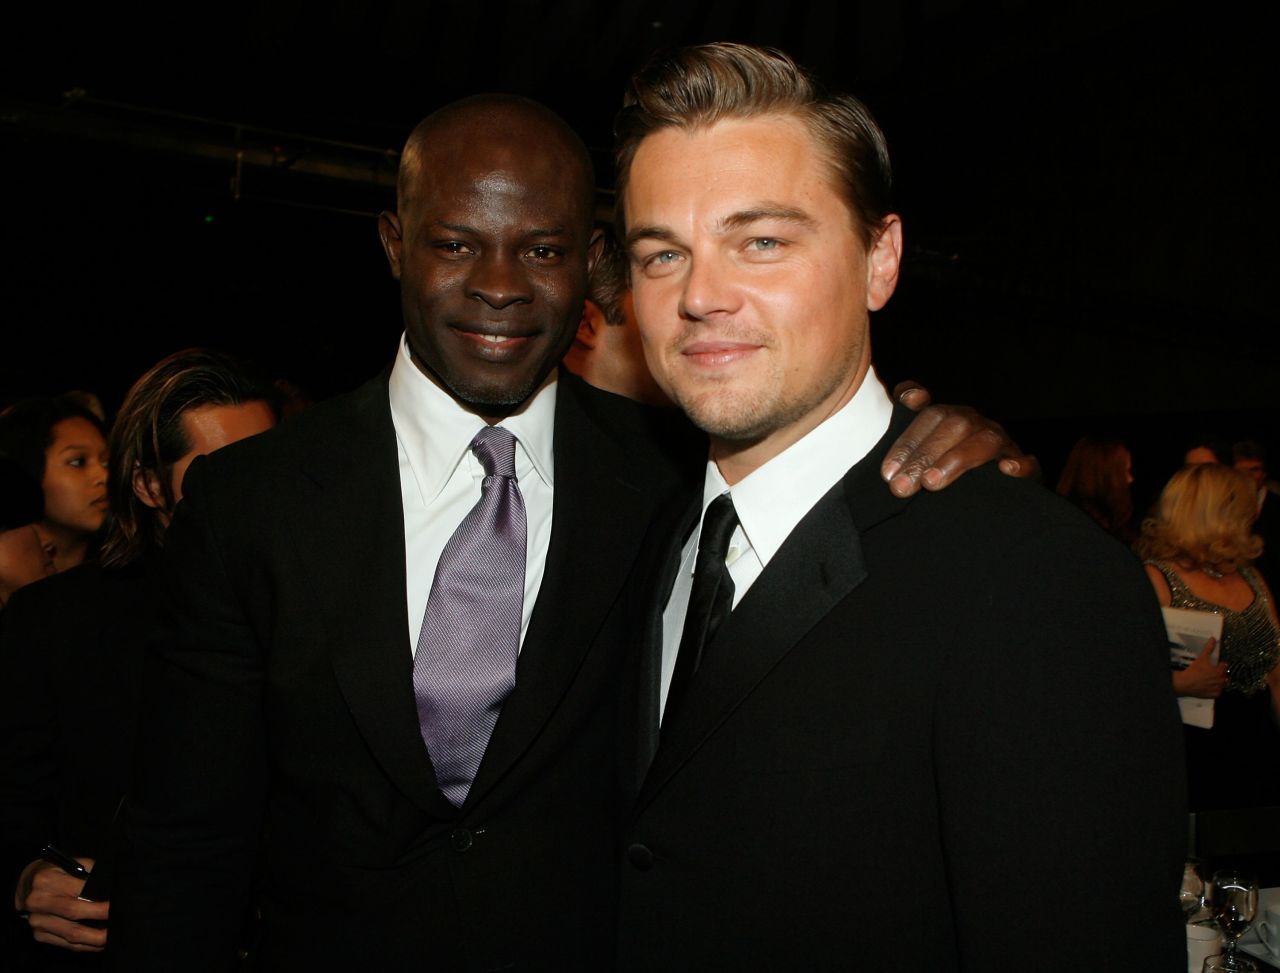 Appearing alongside Leonardo DiCaprio in "Blood Diamond," Hounsou won rave reviews for his portrayal of a fisherman forced to work in a diamond mine after being captured by rebels.